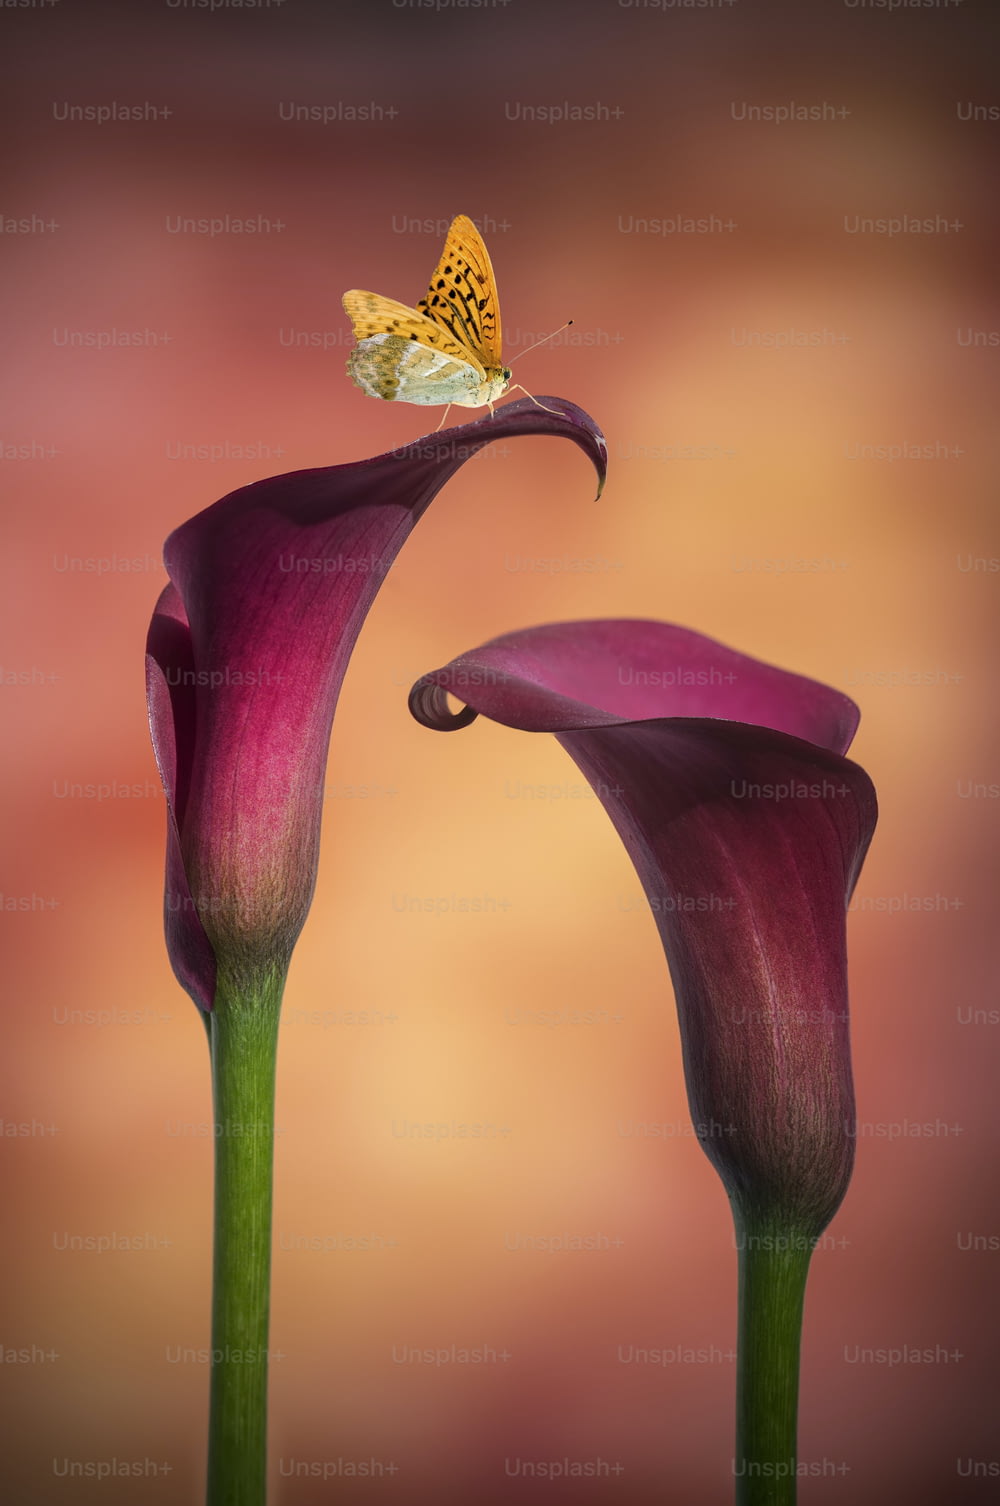 Butterfly on Stunning macro close up image of colorful vibrant calla lily flower